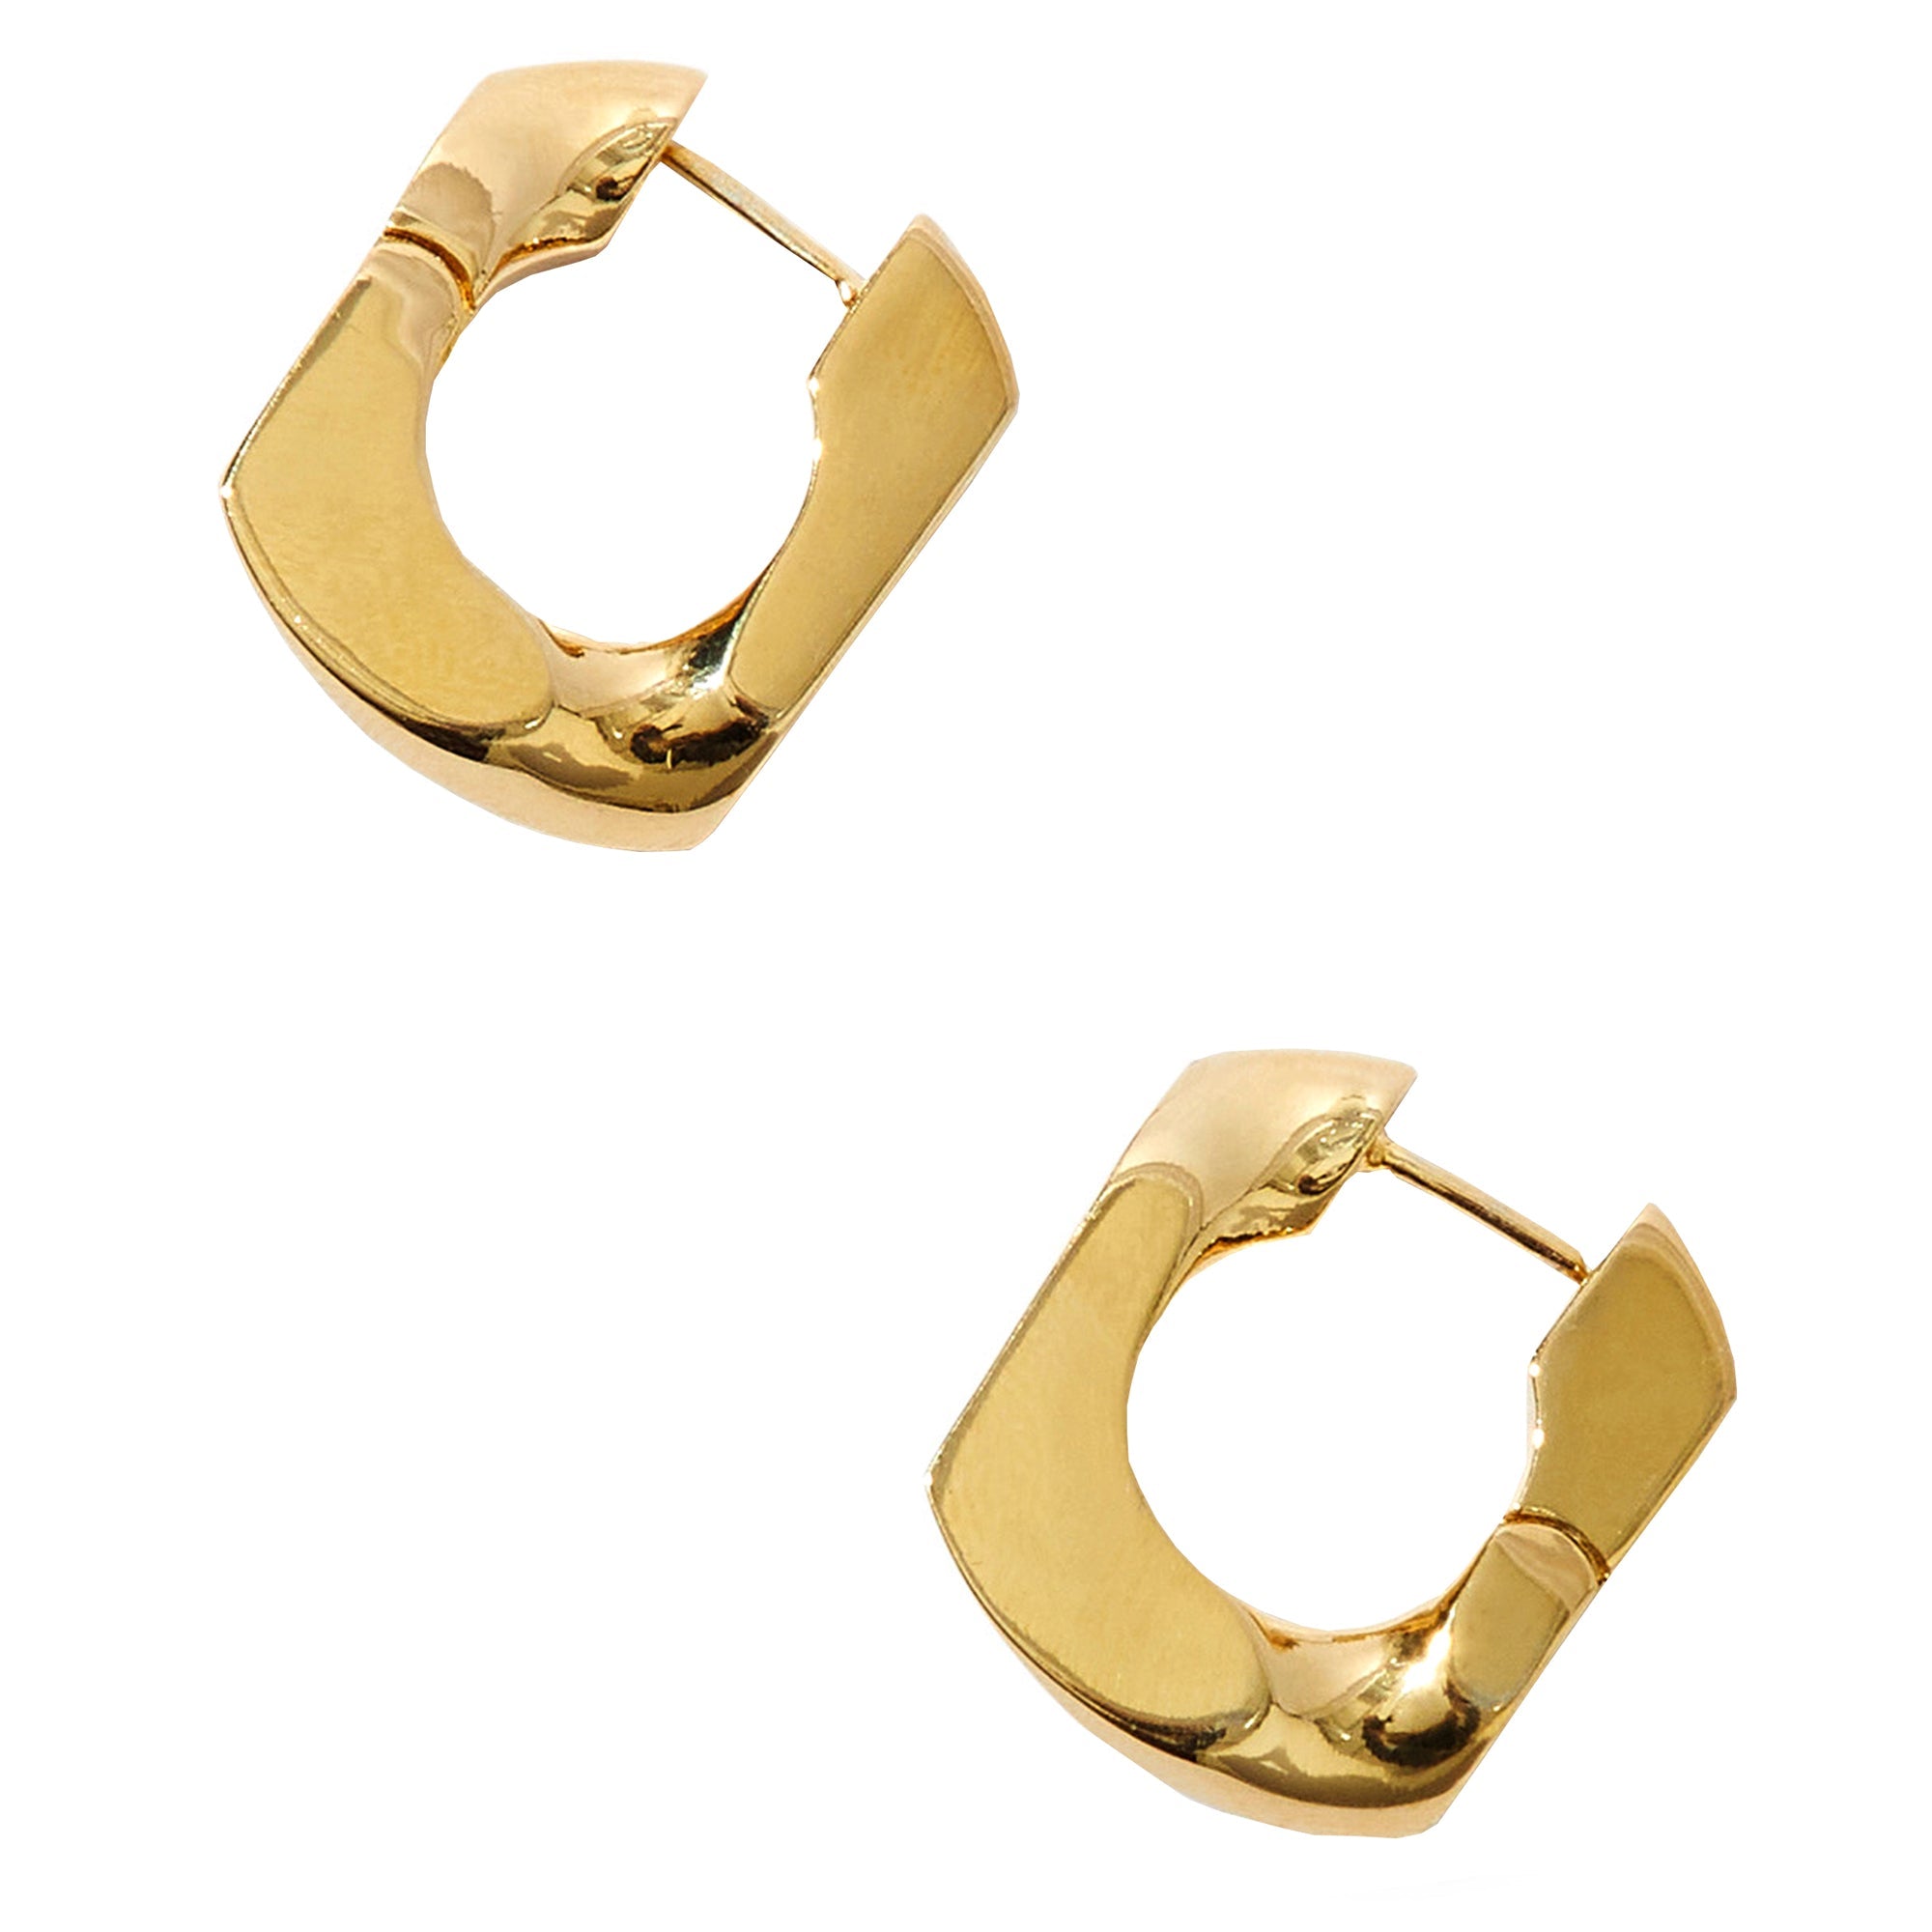 Real Gold Plated Z Limited Chunky Curb Chain Hoop Earrings For Women By Accessorize London